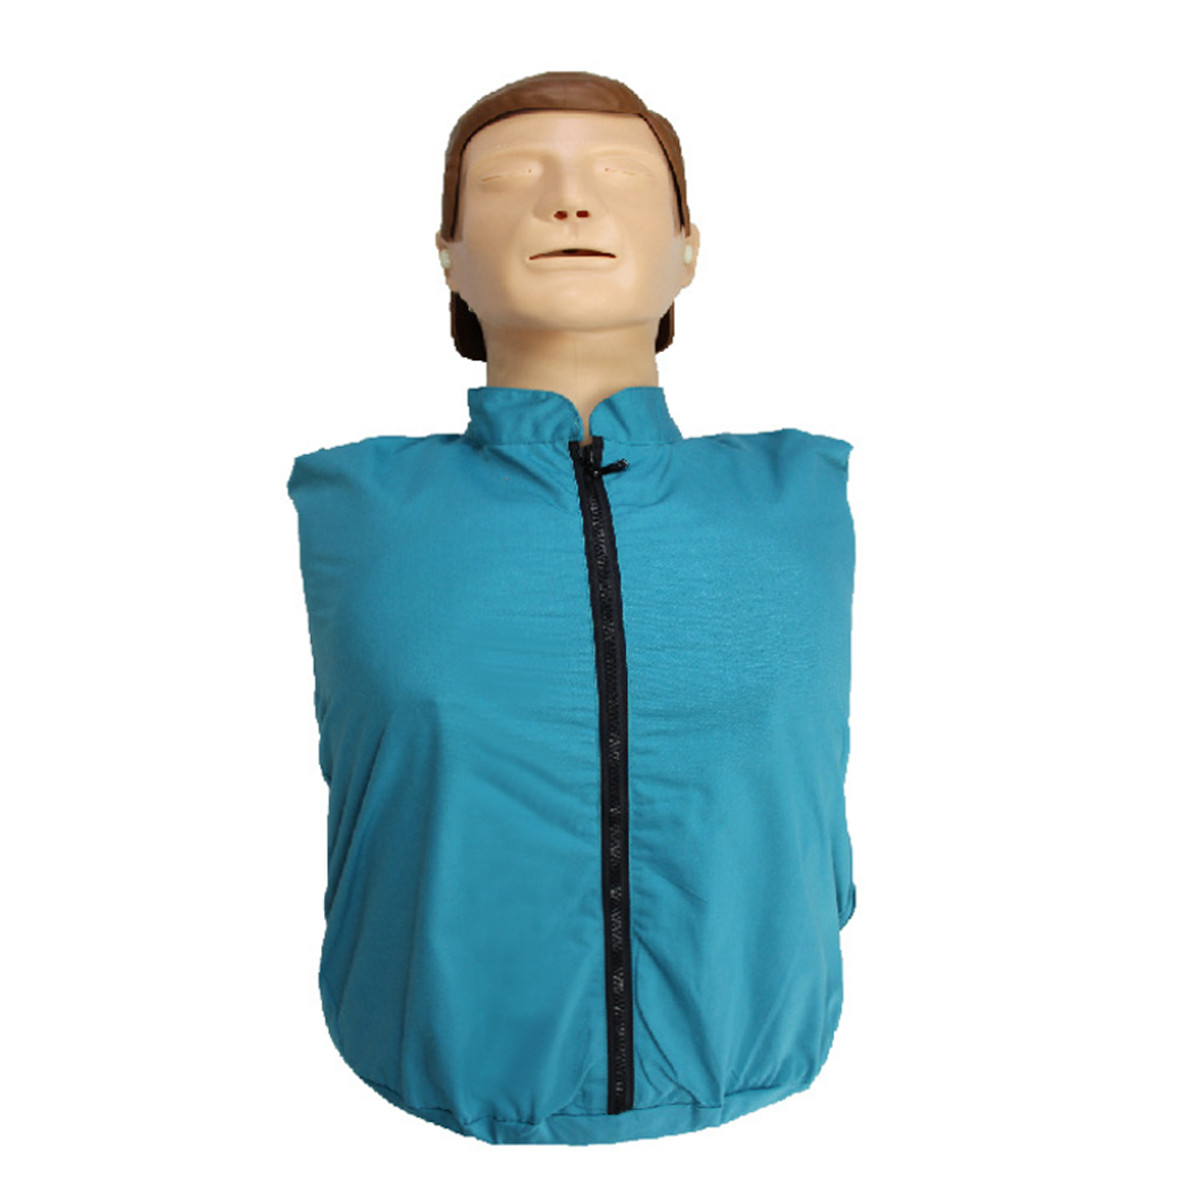 CPR Adult Manikin AED First Aid Training Dummy Training Medical Model Respiration Human 9